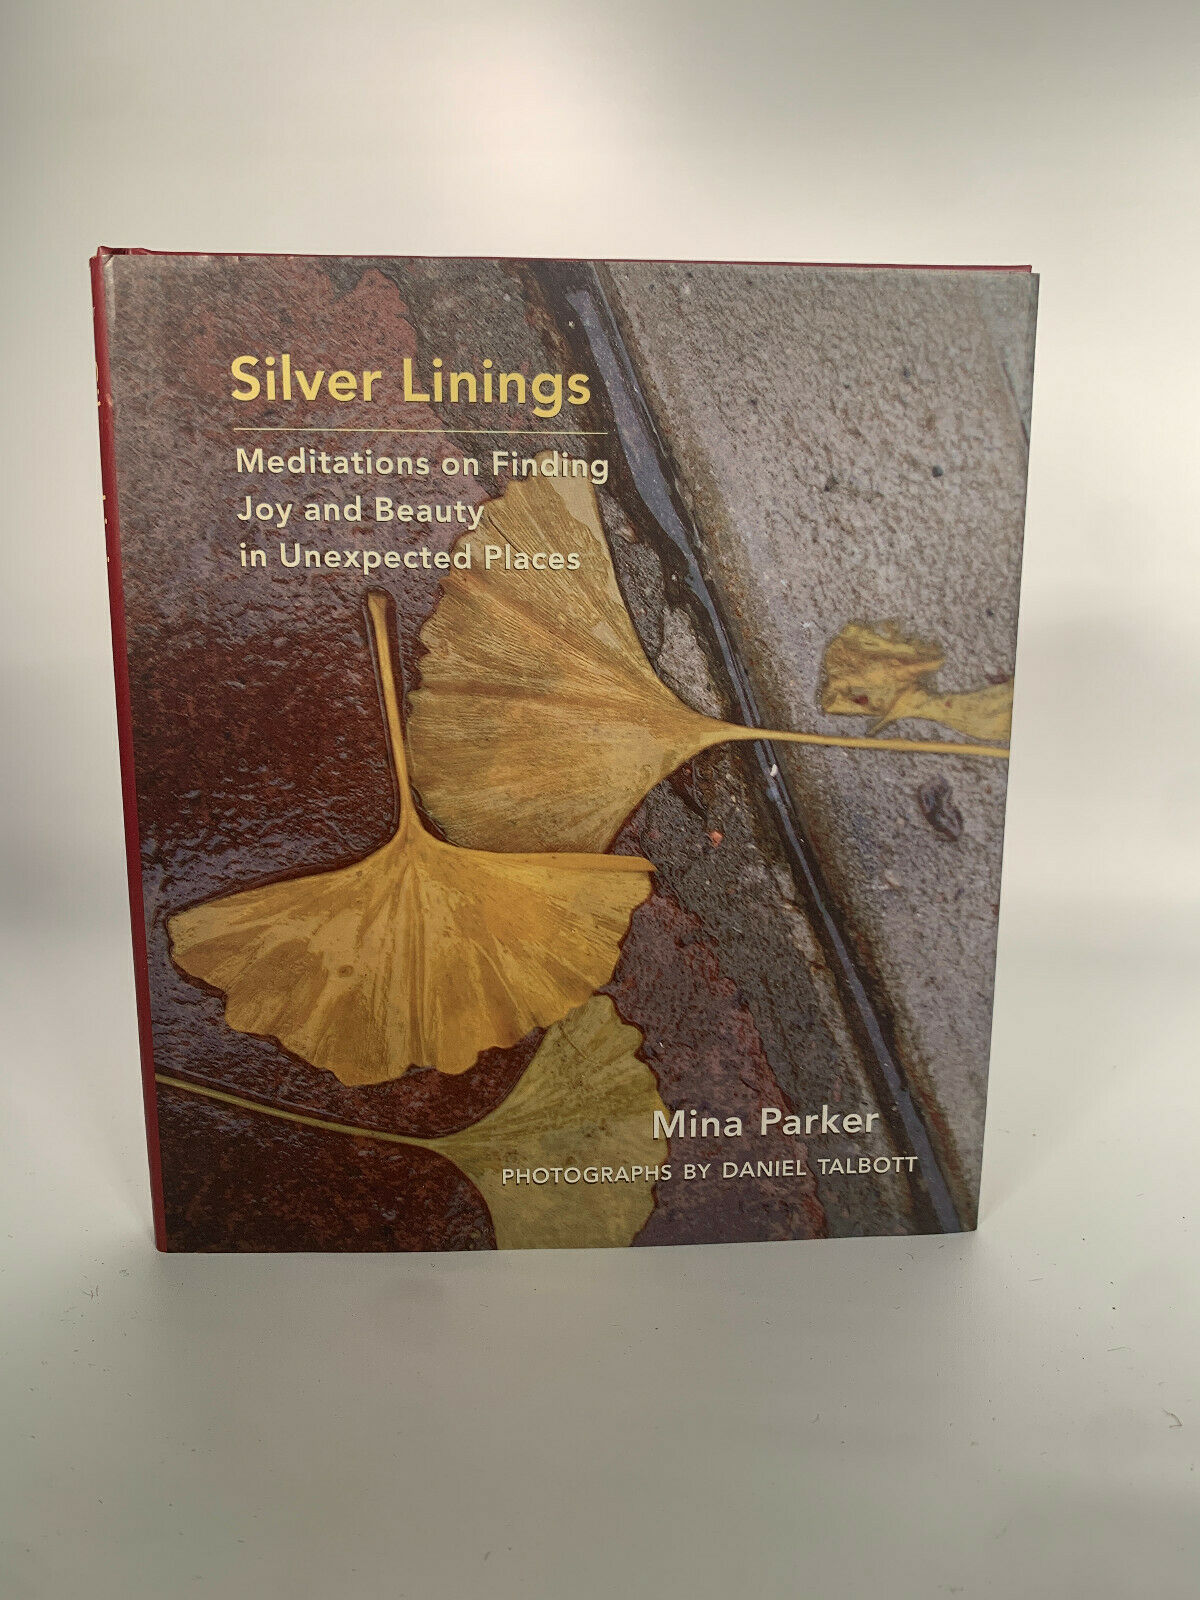 SILVER LININGS: MEDITATIONS ON FINDING JOY AND BEAUTY IN By Mina Parker